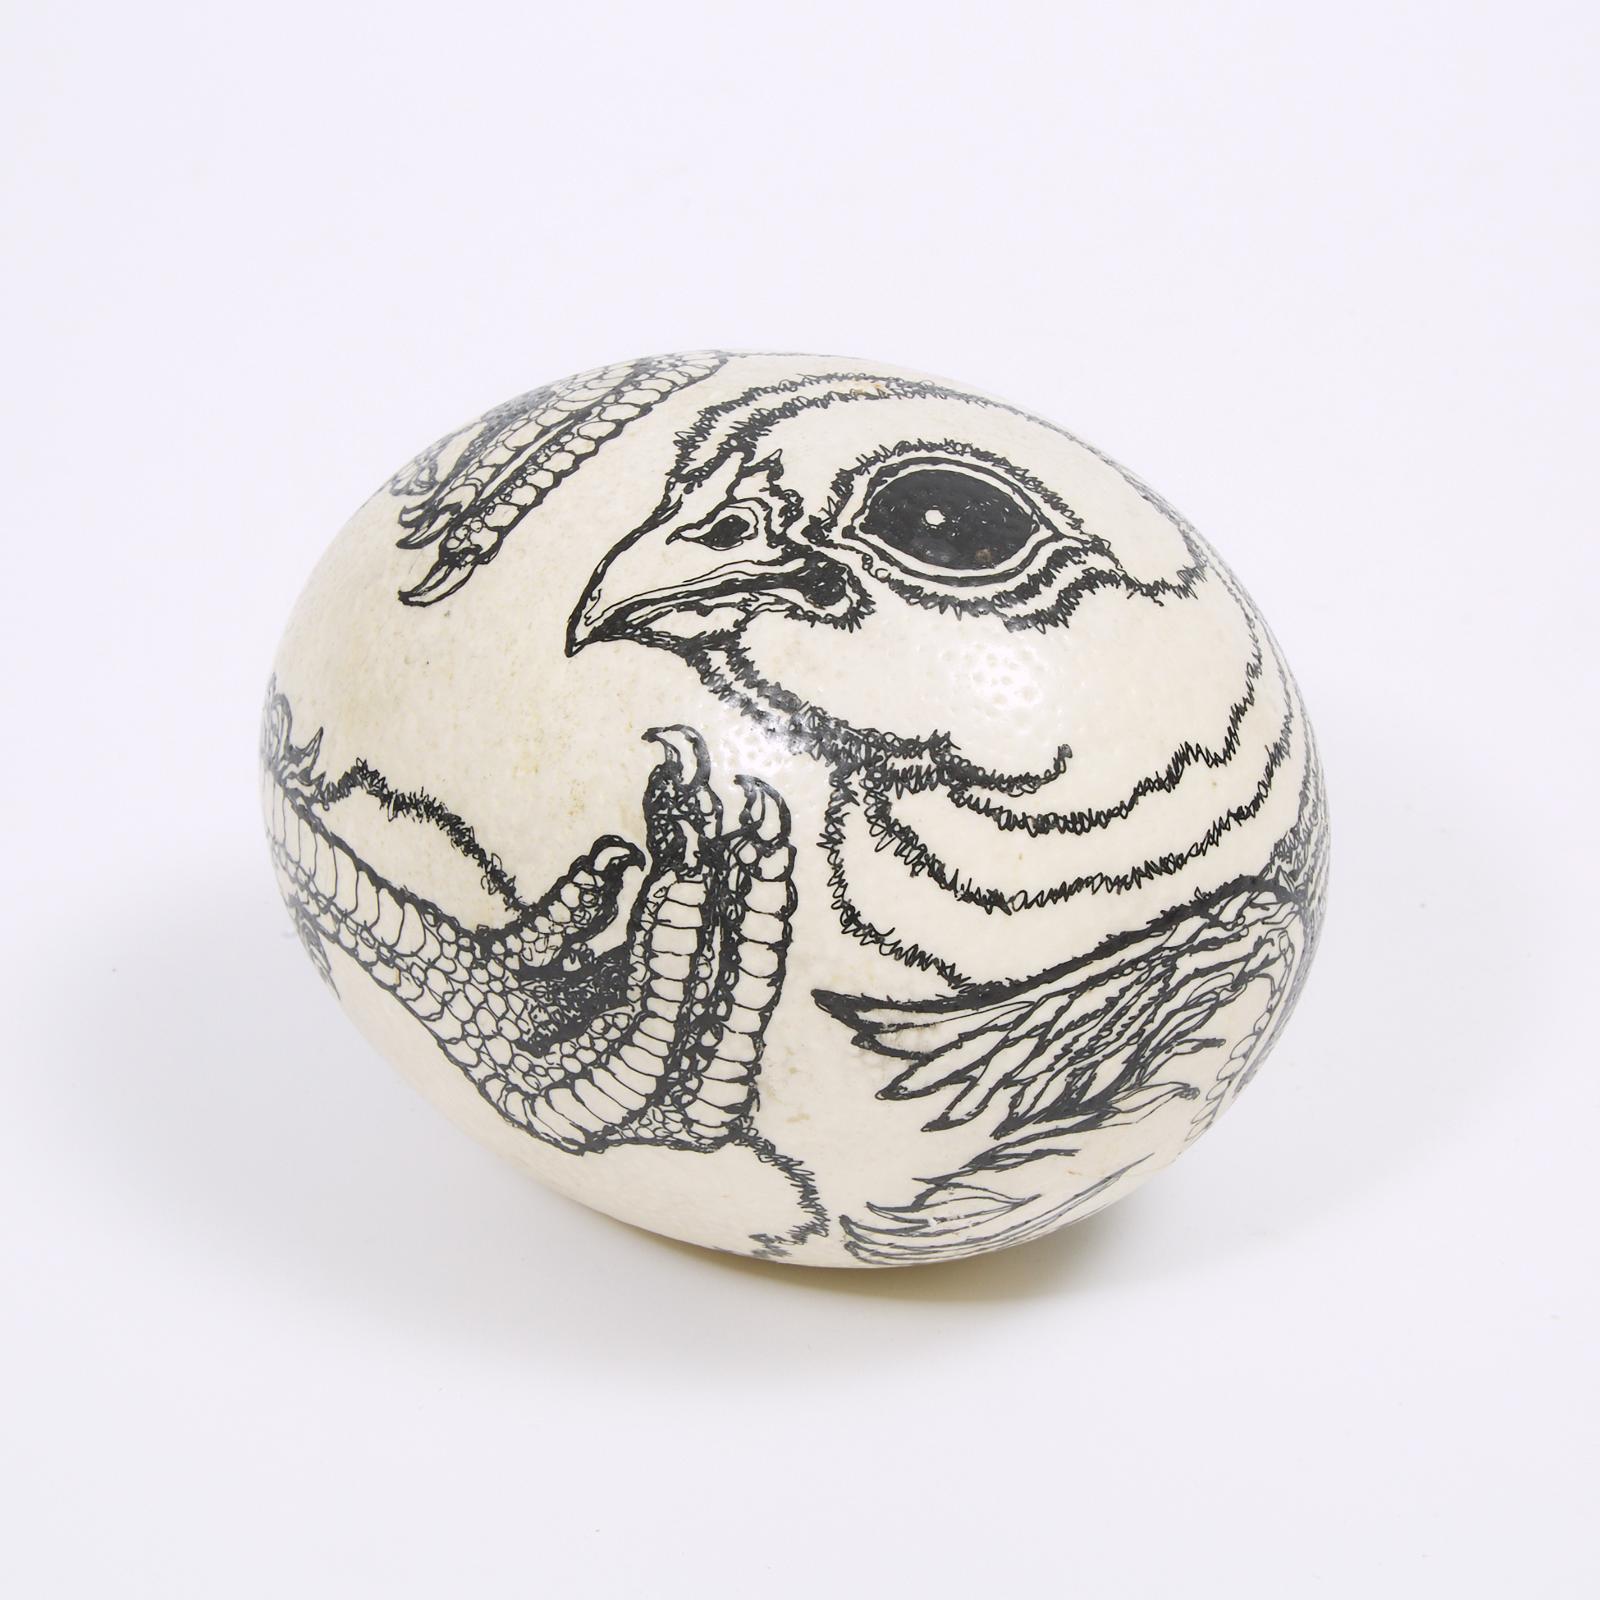 Lindee Climo (1948) - Embryonic Ostrich Egg